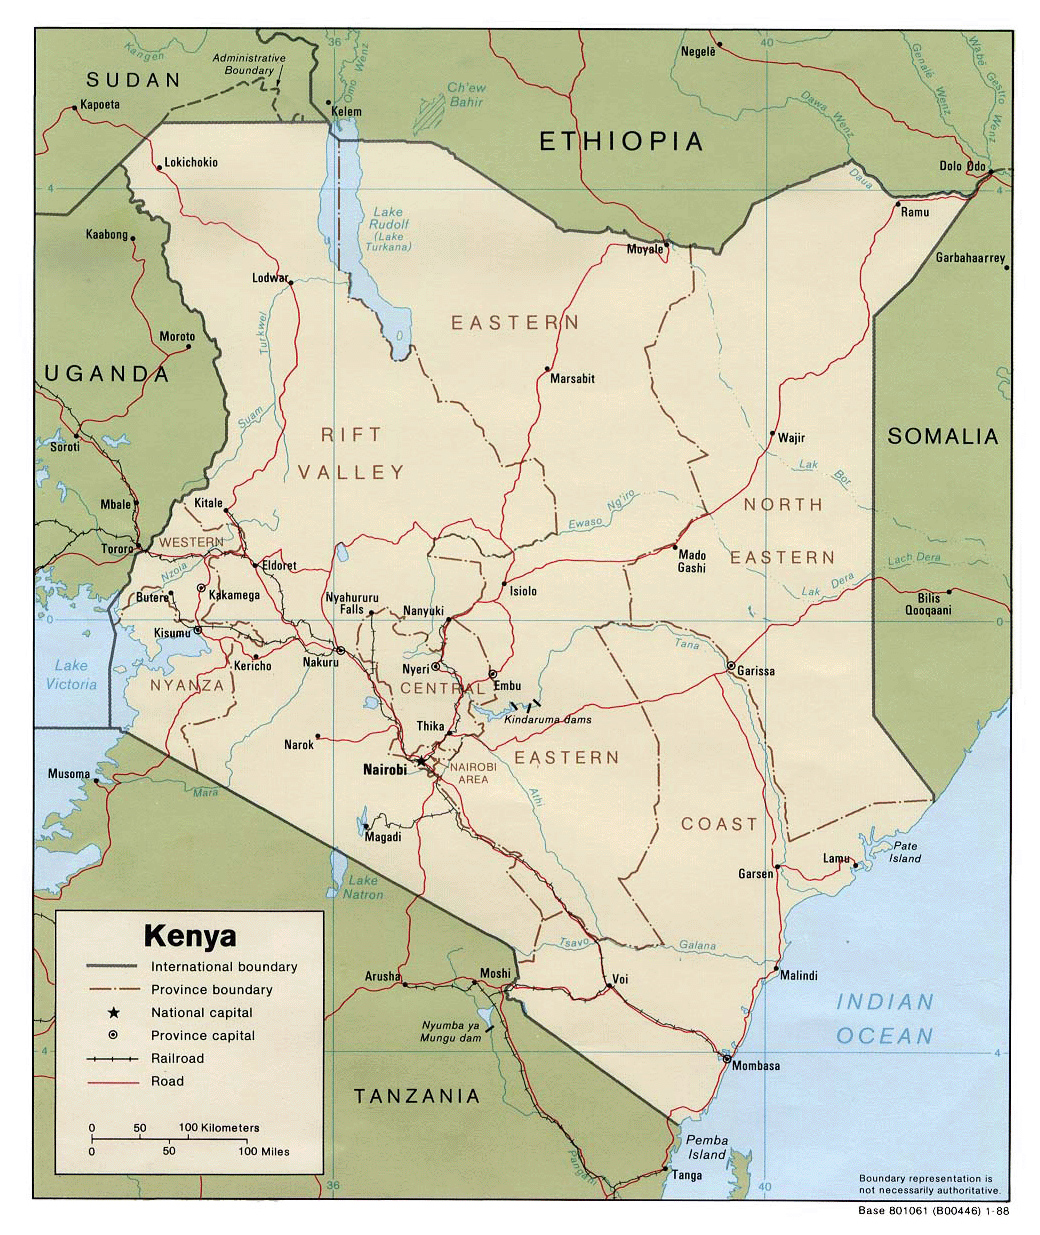 Detailed Political And Administrative Map Of Kenya With Roads Railroads And Major Cities 1988 